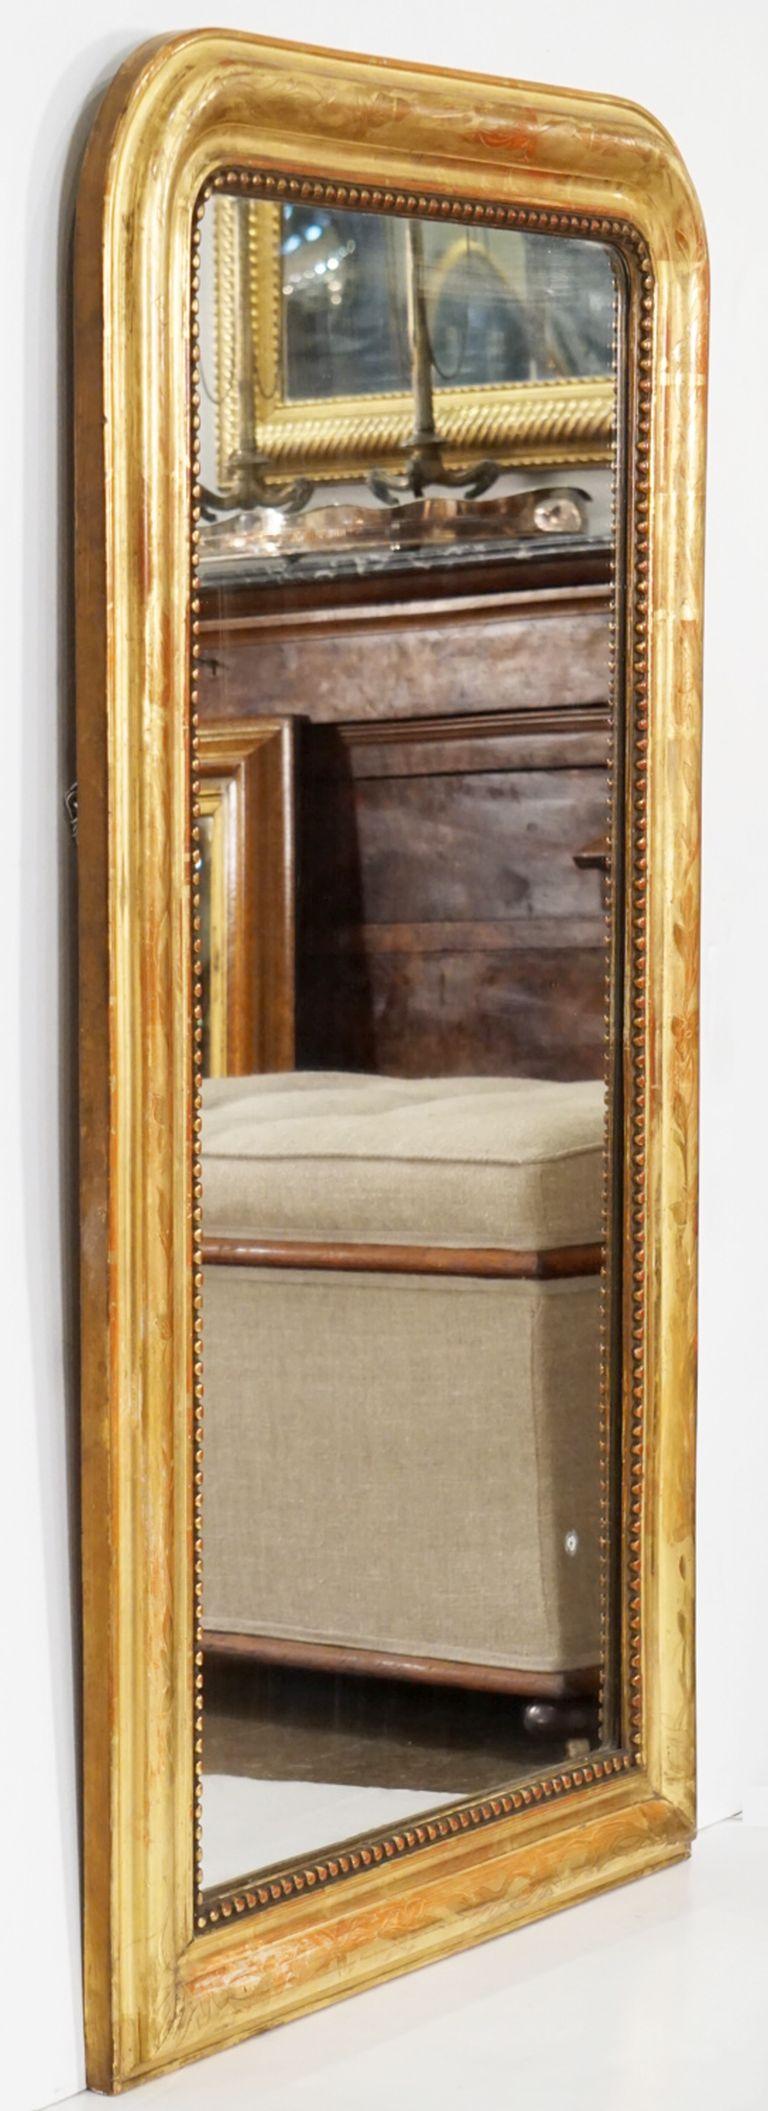 A fine Louis Philippe arch top wall mirror from France, featuring a moulded surround with a beautiful patinated gold-leaf.

Dimensions: H 49 1/4 inches x W 28 3/4 inches

Other sizes available in this style